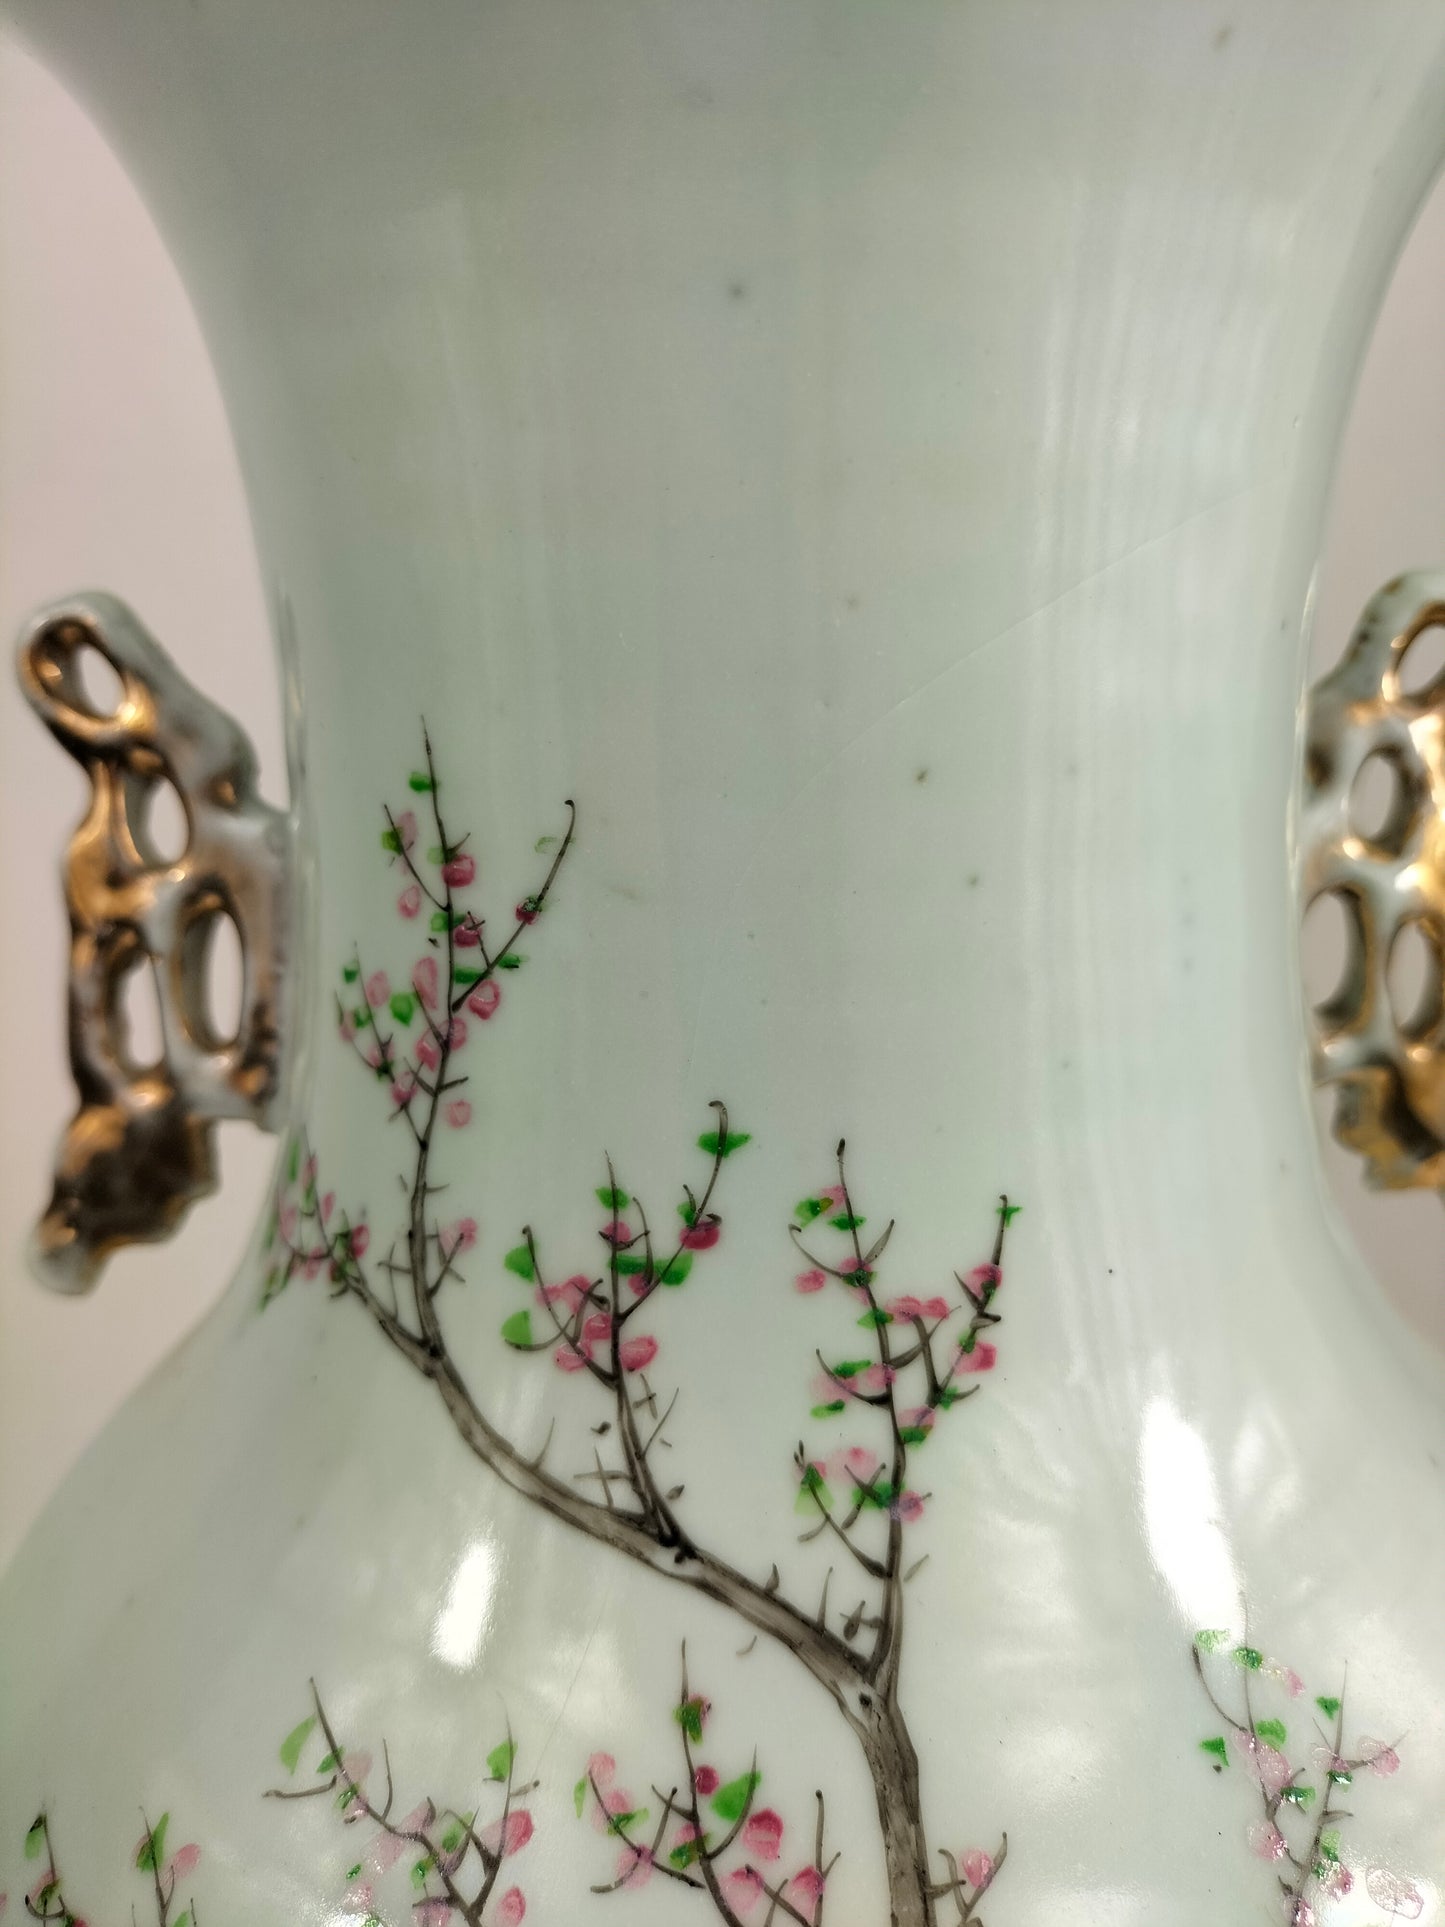 Antique Chinese vase decorated with a garden scene // Republic Period (1912-1949)